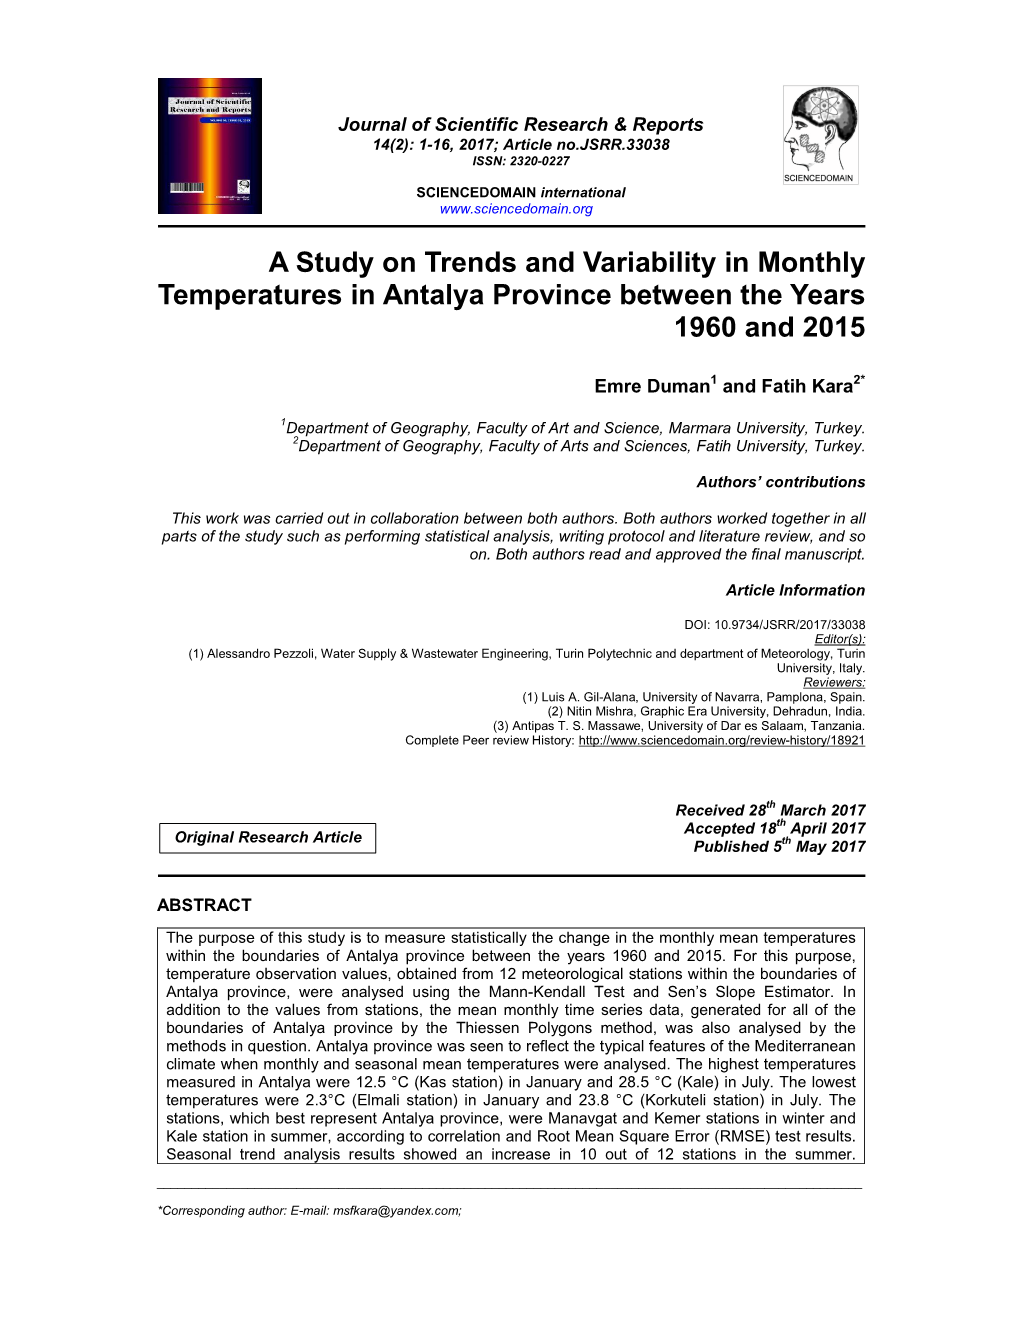 A Study on Trends and Variability in Monthly Temperatures in Antalya Province Between the Years 1960 and 2015